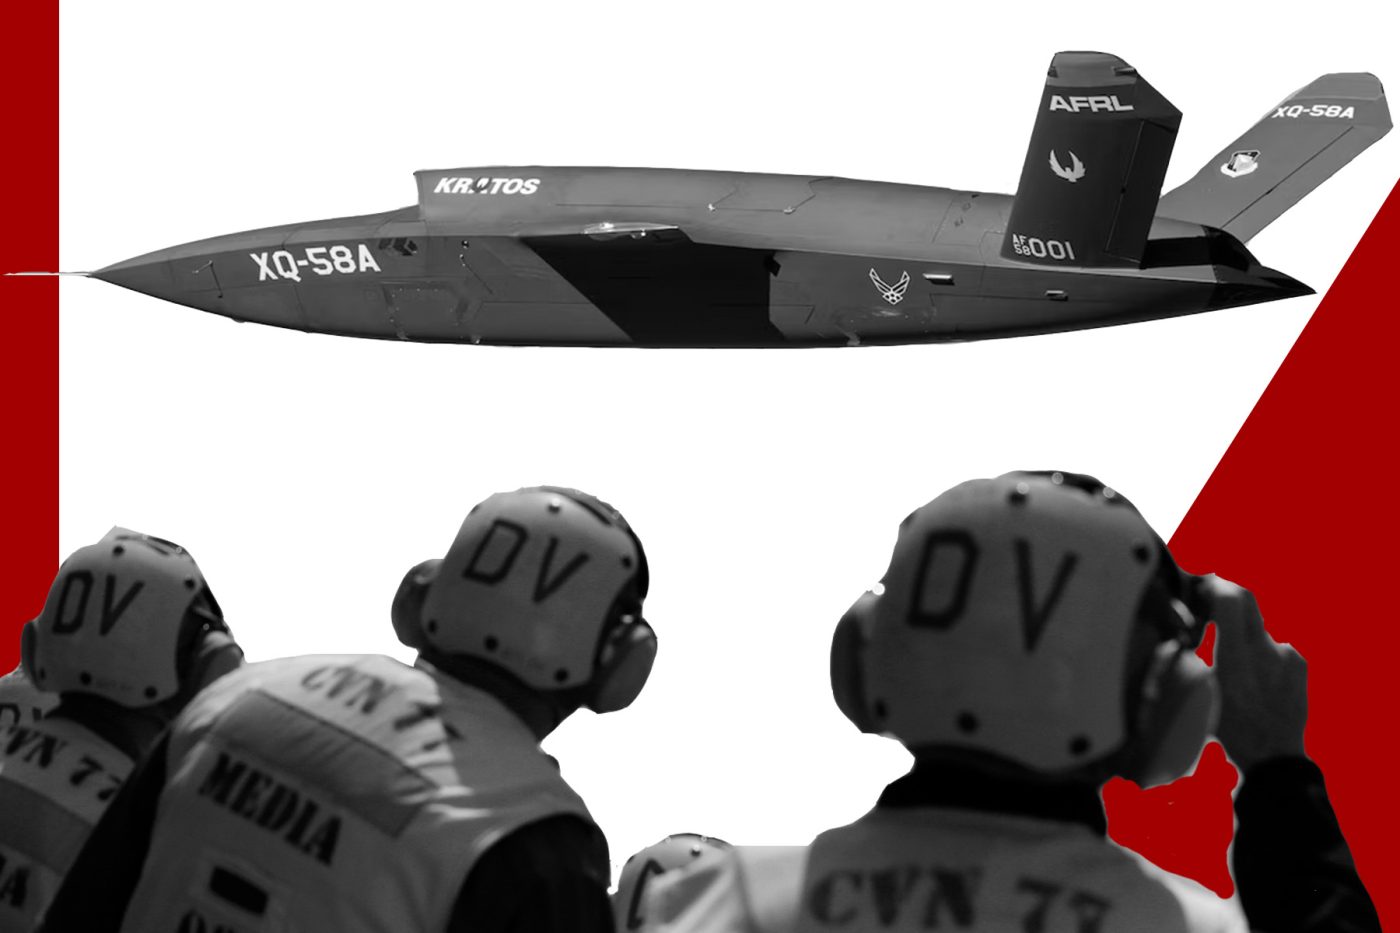 Illustration: Michael Newton/ Center for European Policy Analysis. Images Top: The XQ-58A Valkyrie demonstrator, a long-range, high subsonic unmanned air vehicle completed its inaugural flight March 5, 2019 at Yuma Proving Grounds, Arizona. Credit: 88 Air Base Wing Public Affairs; Image Bottom: An X-47B pilot-less drone combat aircraft is launched for the first time off an aircraft carrier, the USS George H. W. Bush, in the Atlantic Ocean off the coast of Virginia, May 14, 2013. The U.S. Navy made aviation history on Tuesday by catapulting an unmanned jet off an aircraft carrier for the first time, testing a long-range, stealthy, bat-winged plane that represents a jump forward in drone technology. Credit: REUTERS/Jason Reed.